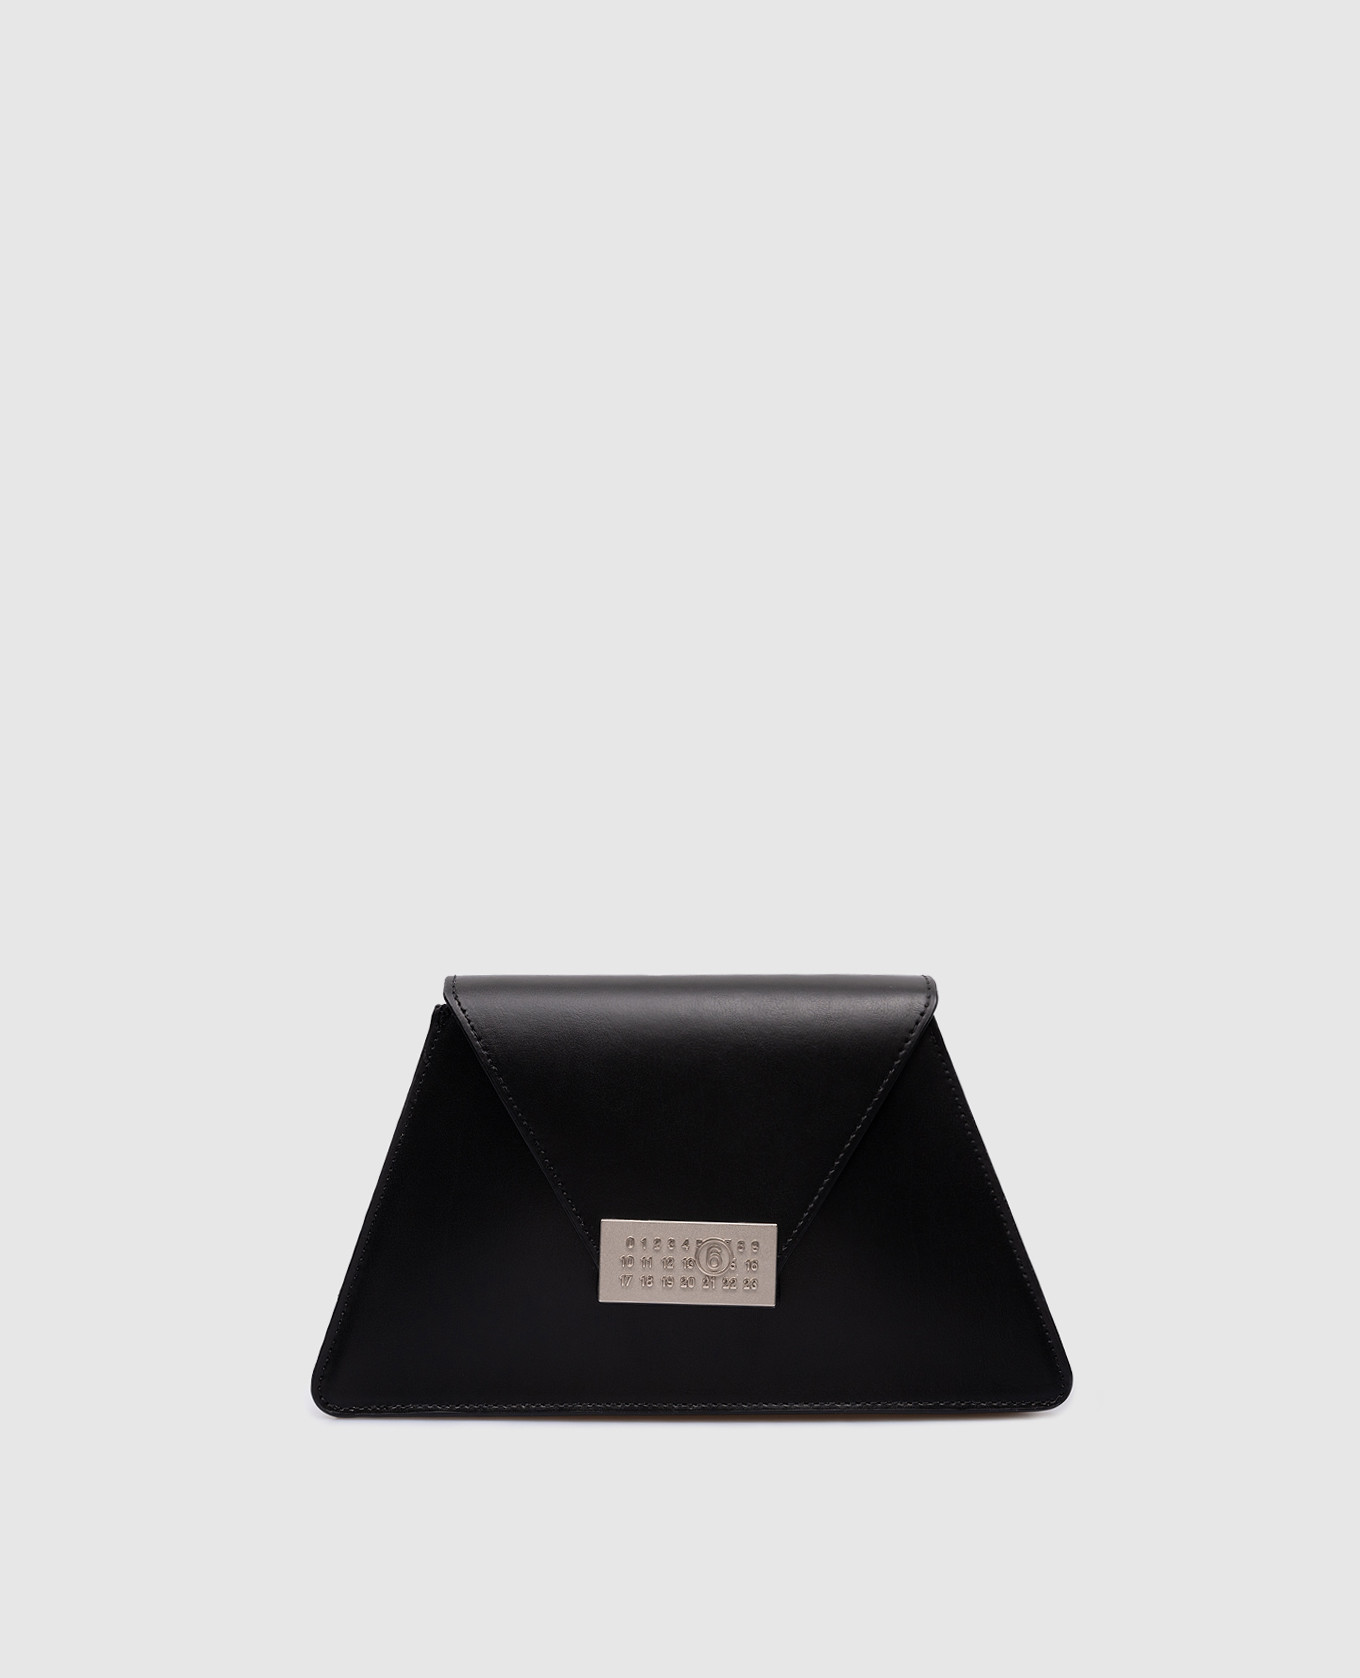 Black leather bag Numeric in origami style